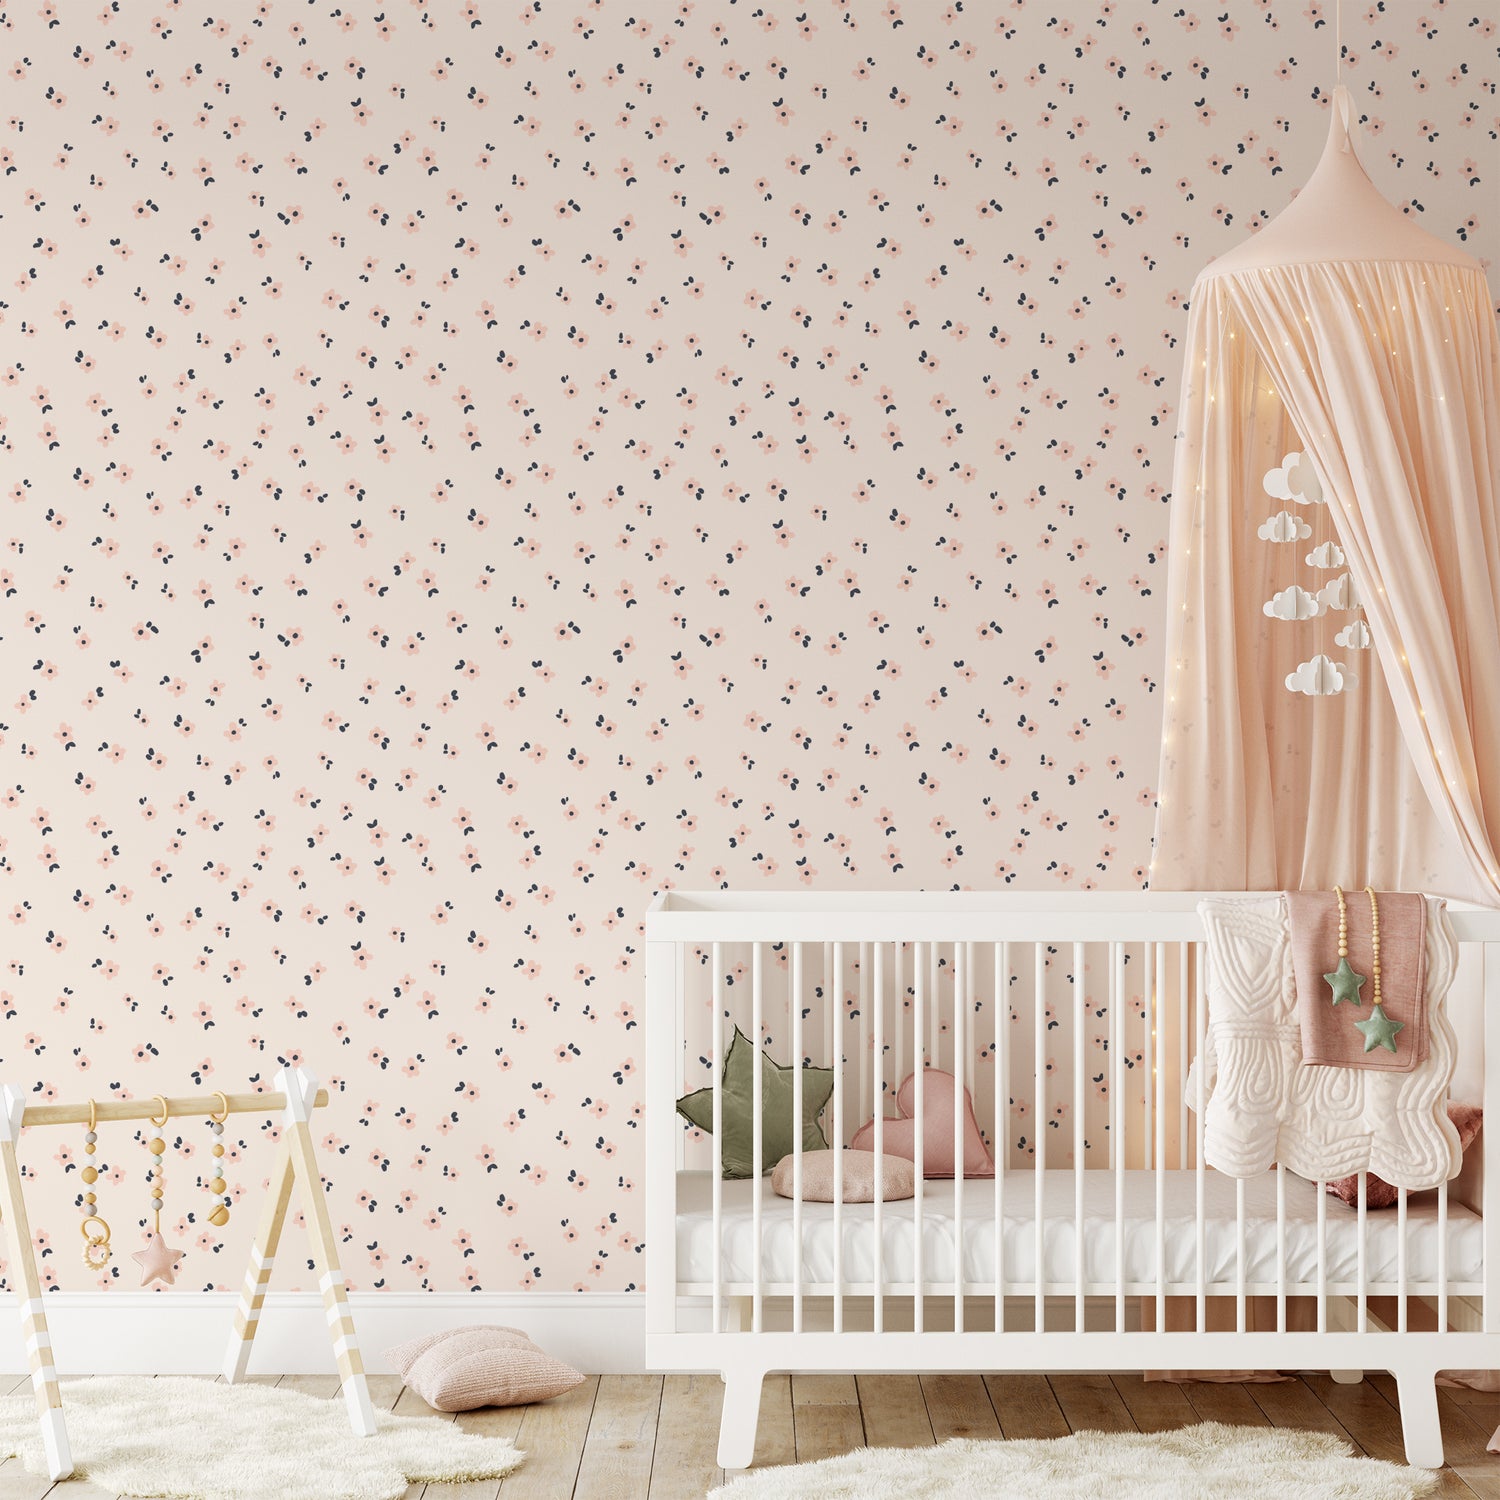 Our Snow in Summer removable peel and stick wallpaper in Blush showcased in a nursery.